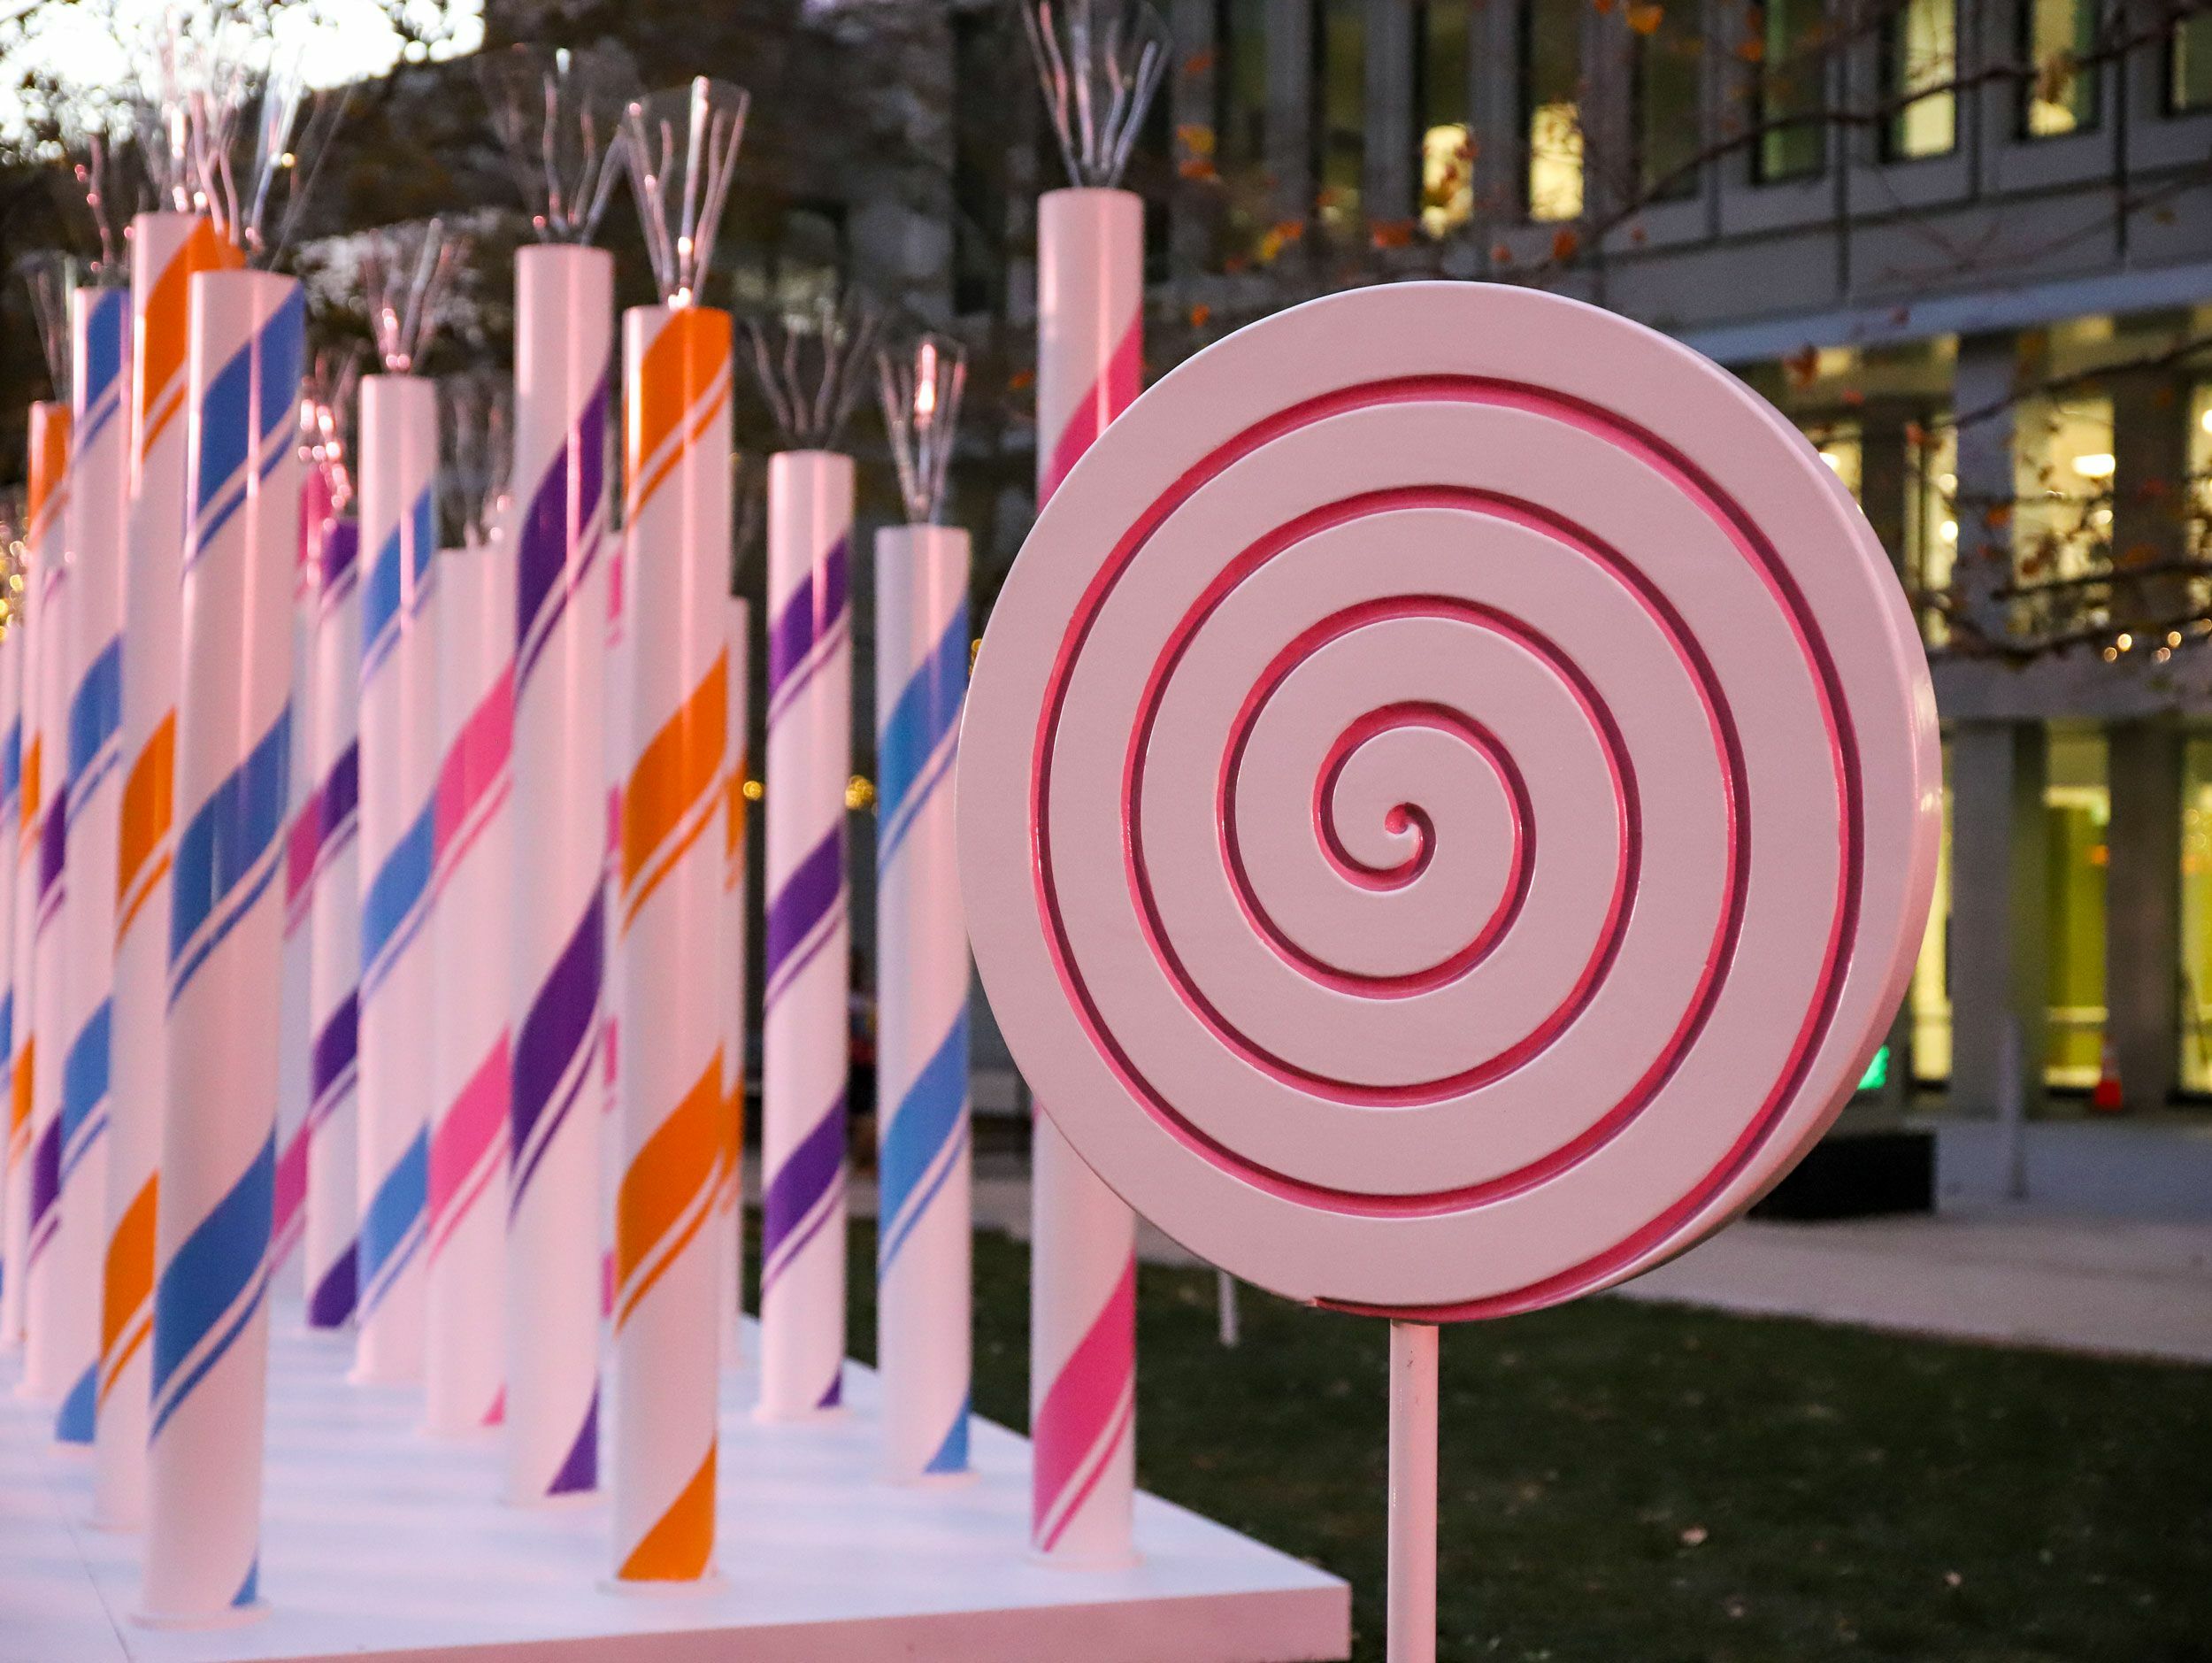 Candy Cane Lane in Center Plaza